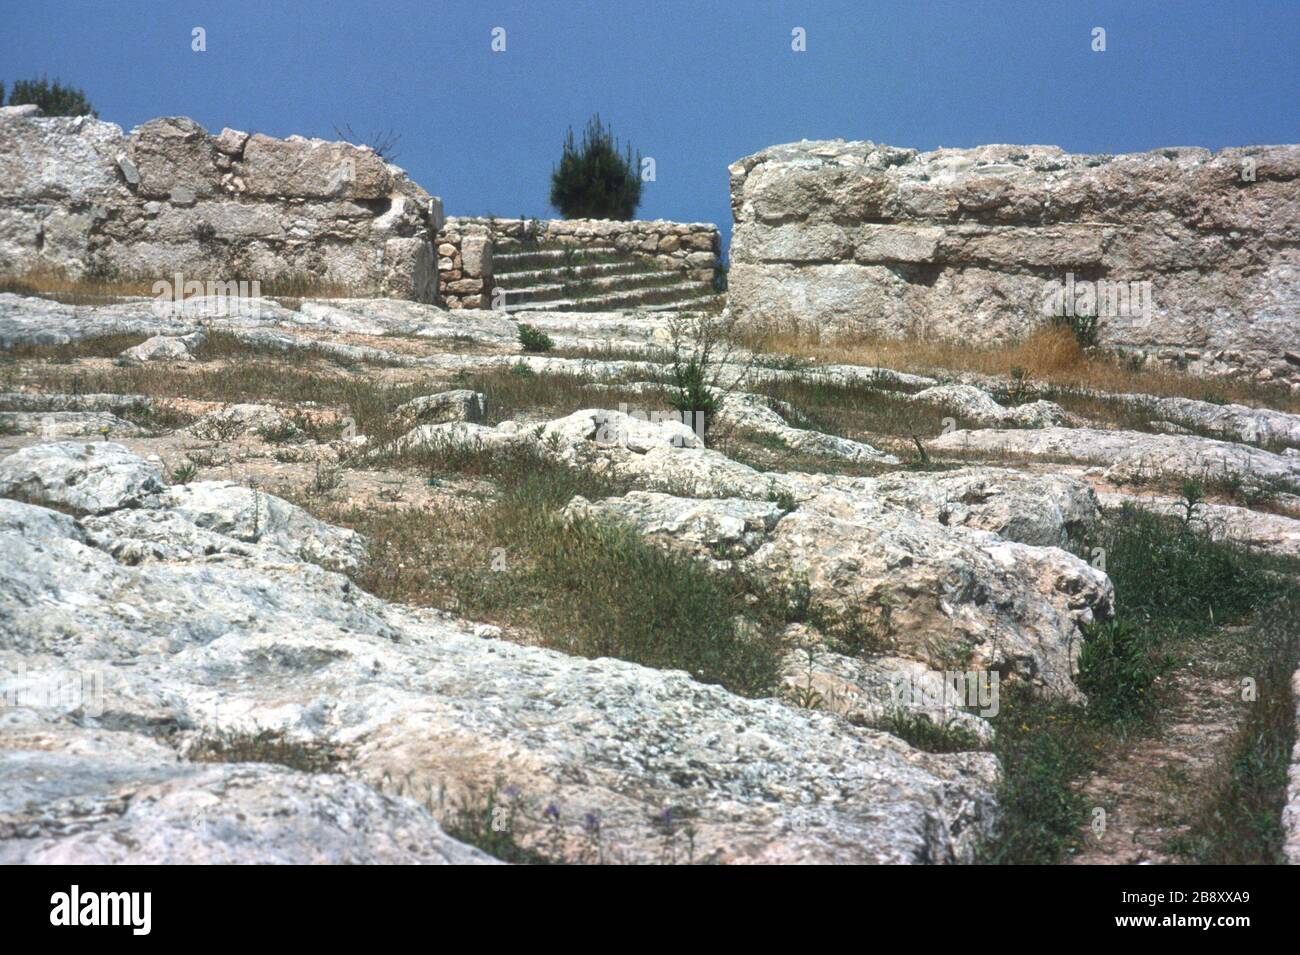 Remains of the spectacular, cliff-top palace of Vouni in Northern Cyprus. Built around 500BC while the area was under Persian control, it was later taken over by Greeks. Around 400BC the site was reclaimed by the Persians after the palace was destroyed in a fire. Stock Photo